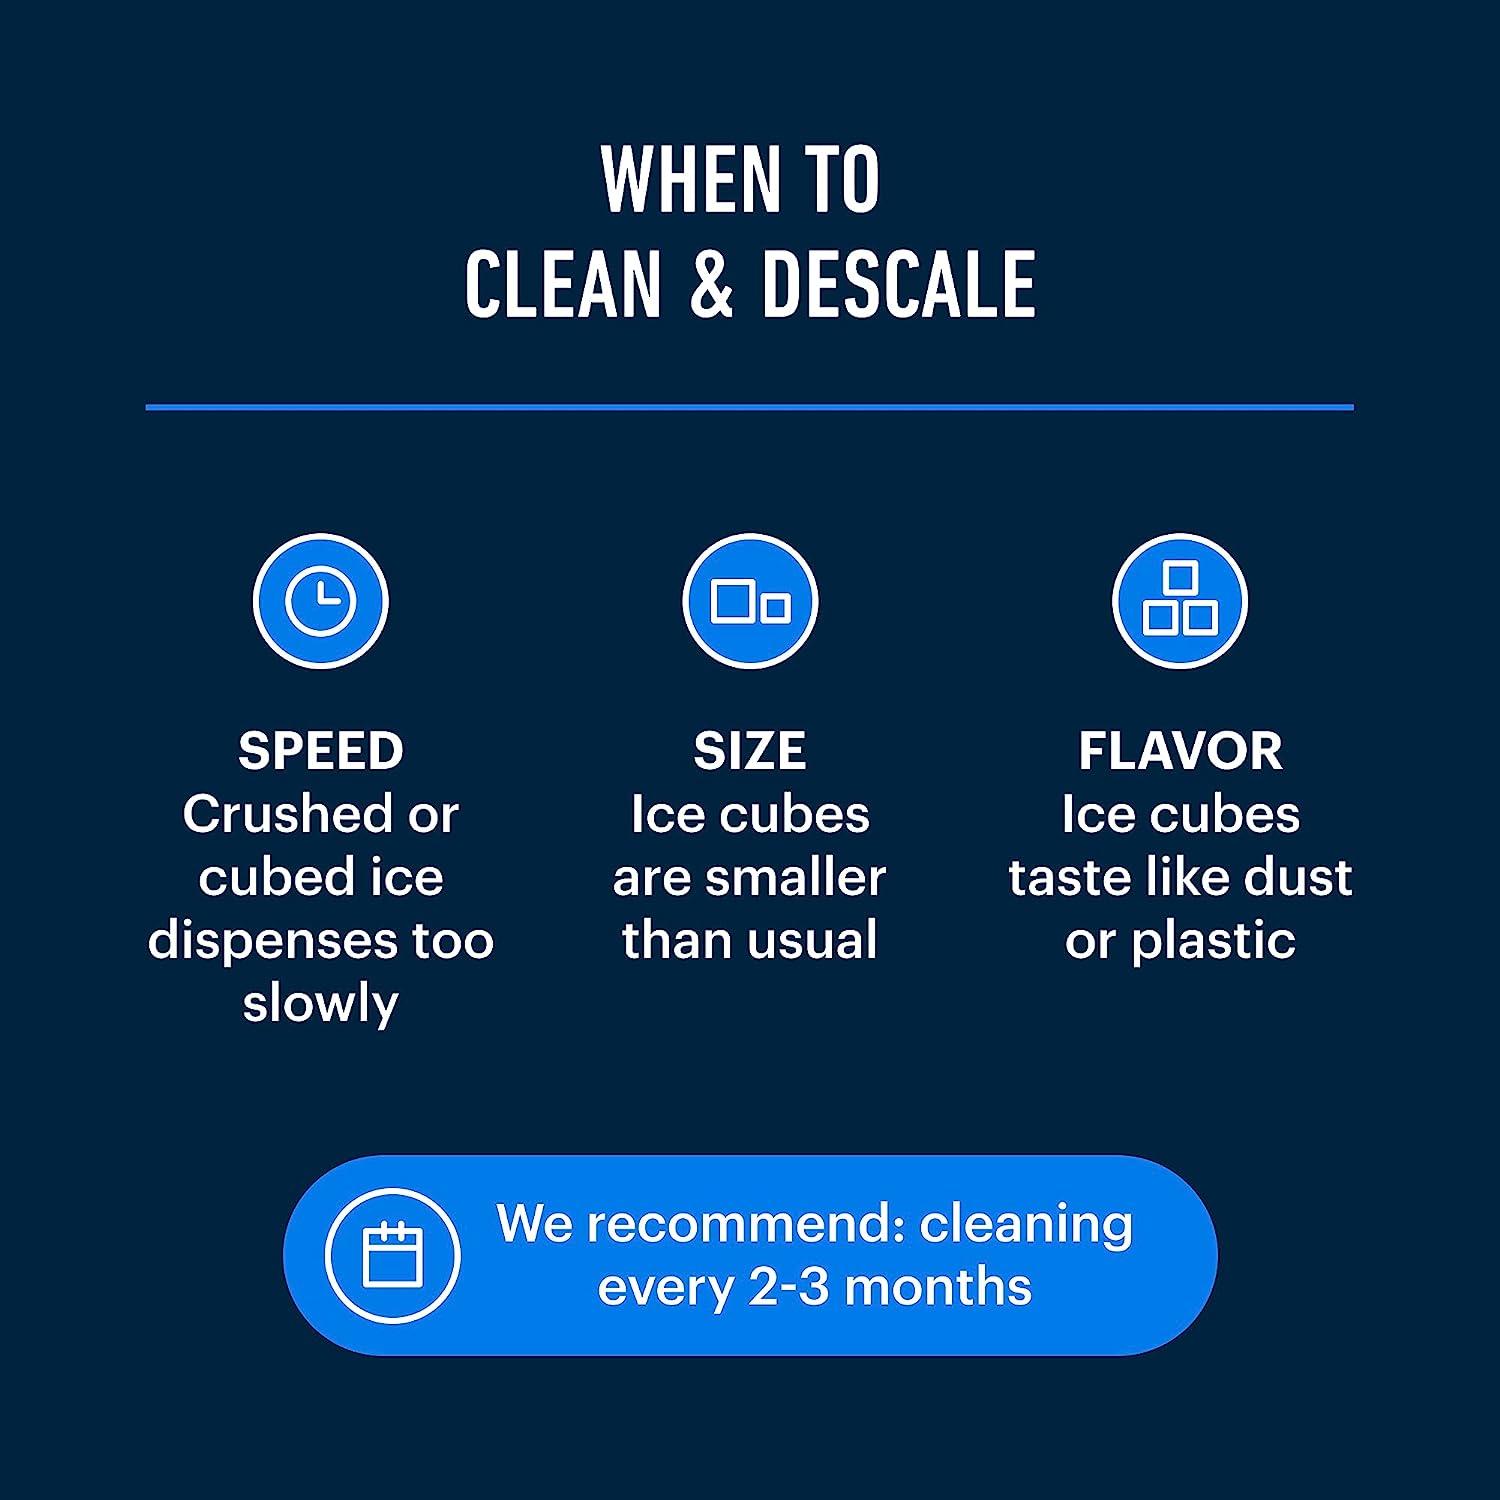 2-Pack Ice Machine Cleaner and Descaler 16 fl oz Nickel Safe Descaler  Ice  Maker Cleaner Compatible with All Major Brands (Scotsman, KitchenAid,  Affresh, Opal, Manitowoc) - Made in USA Clear